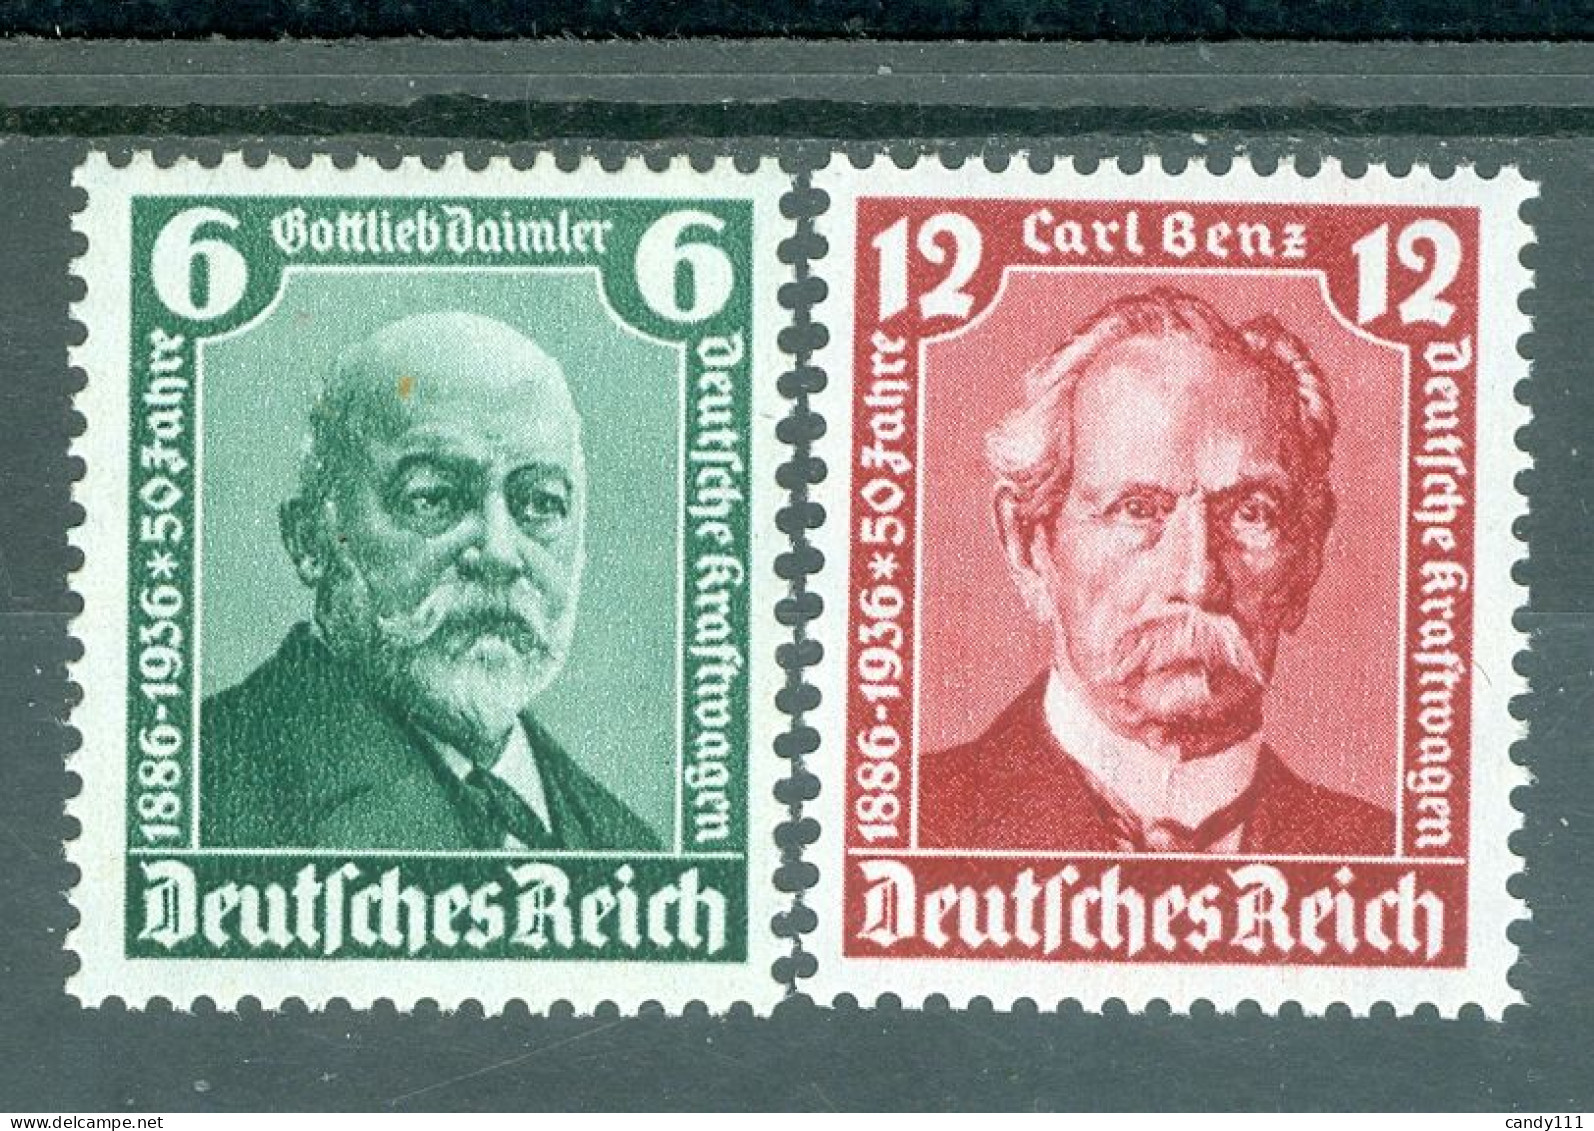 1938 Gottlieb Daimler,Carl Benz,Motorcycle And Motor Show,Germany/Reich,604,MNH - Otros (Tierra)